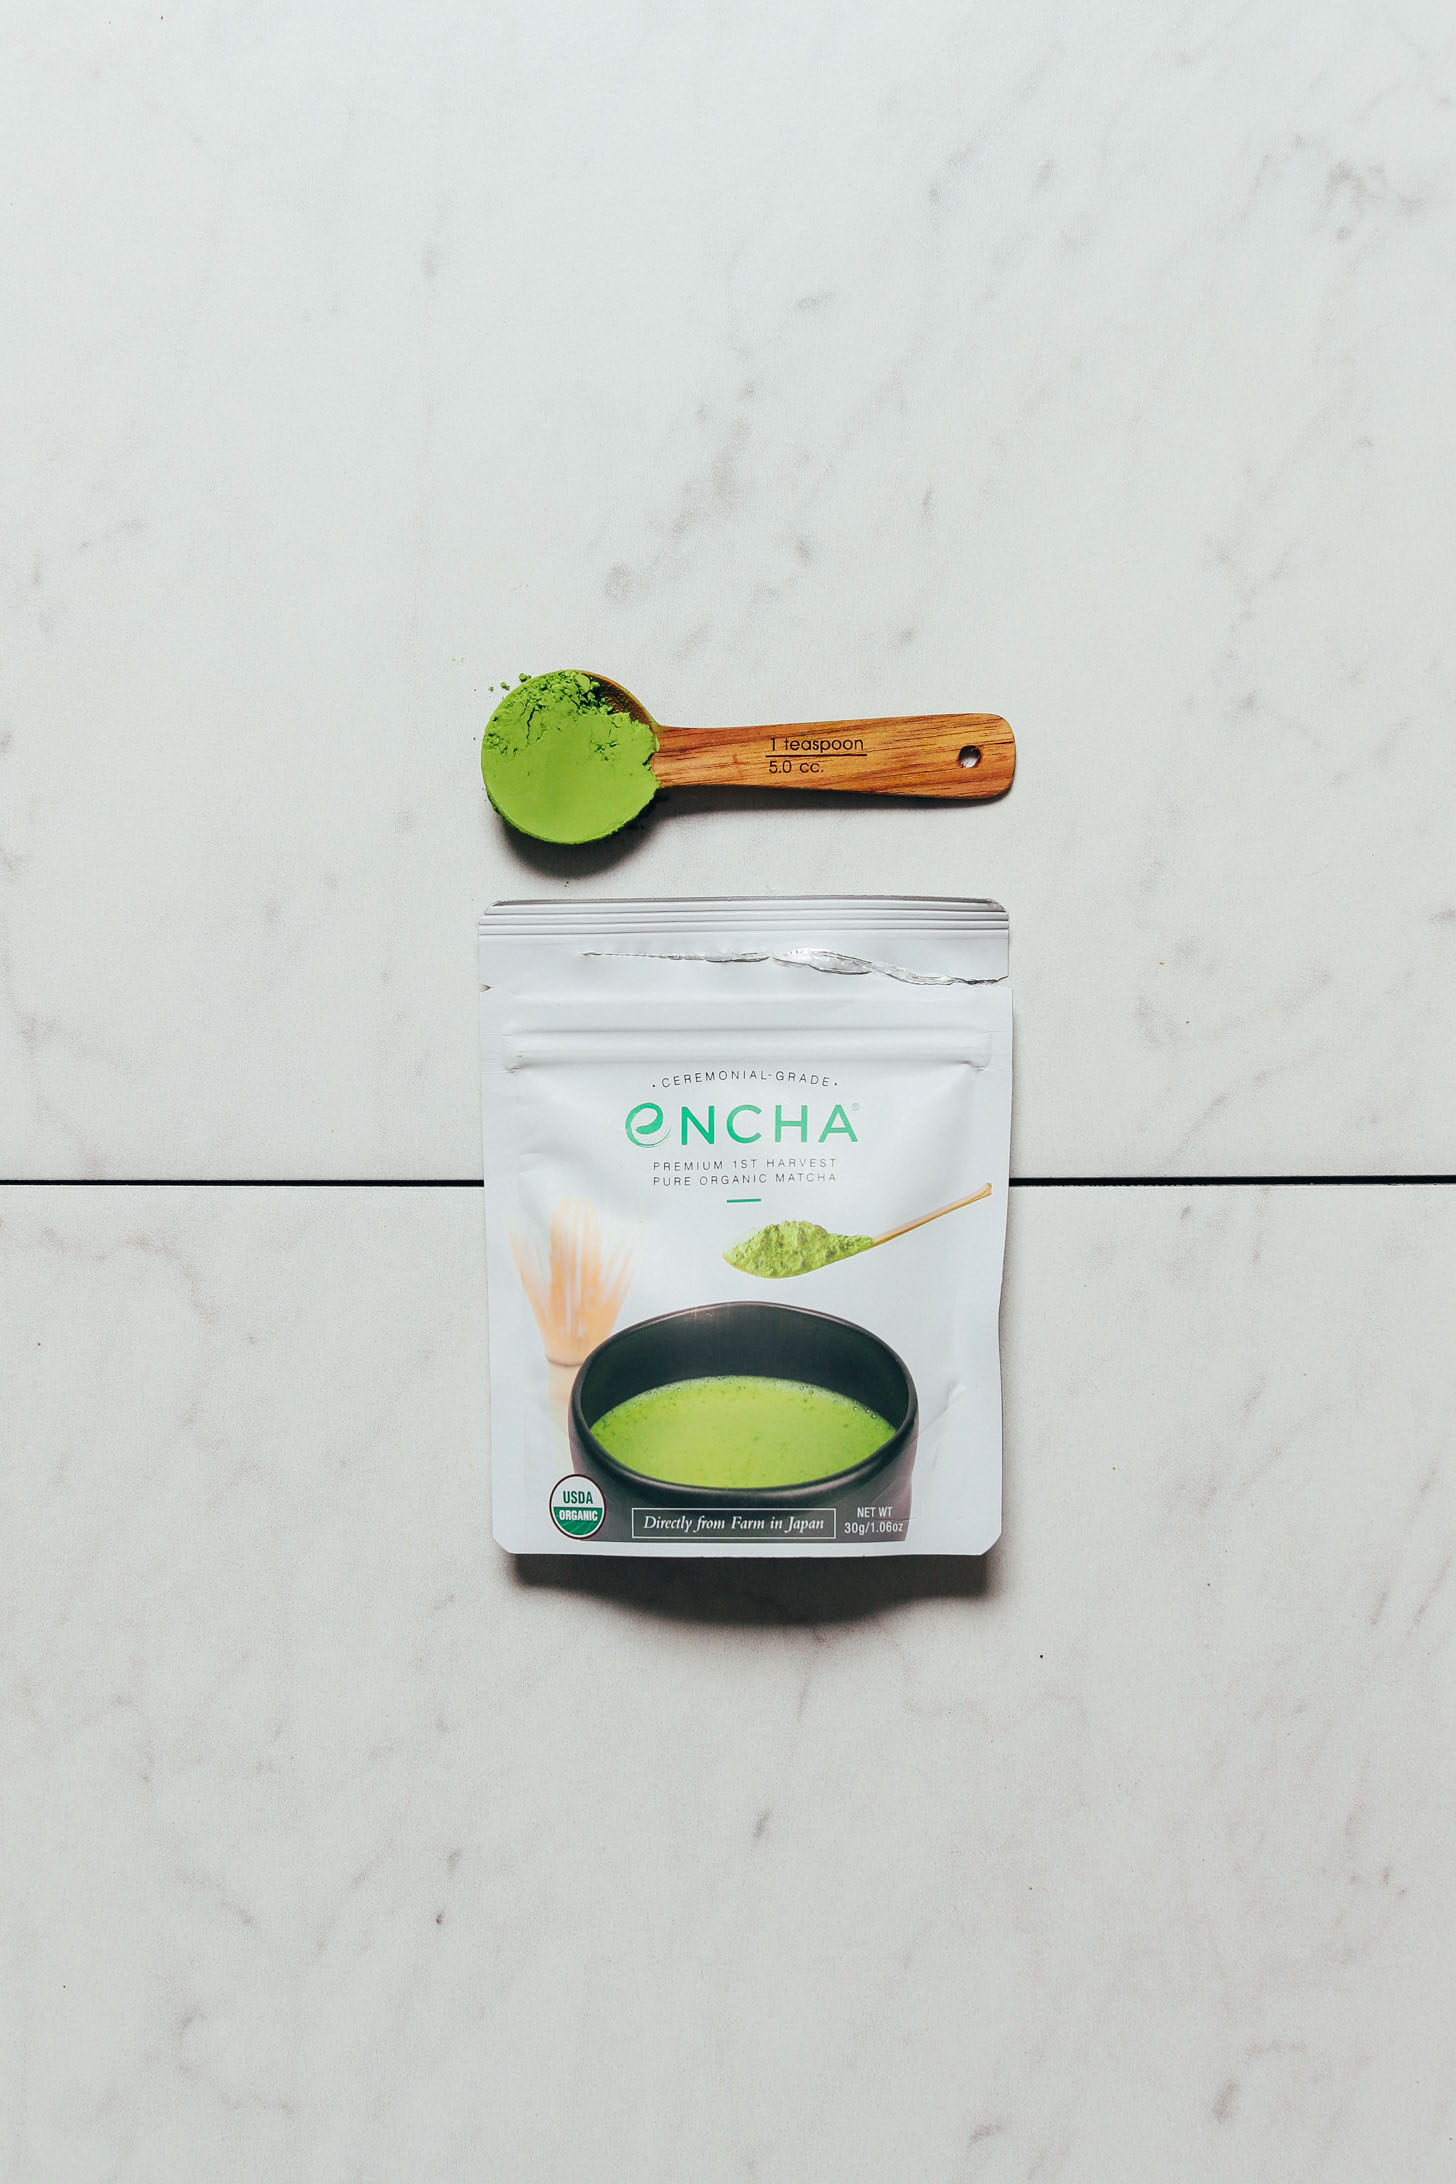 Spoonful and packet of Encha matcha powder for our review of the best brands of matcha